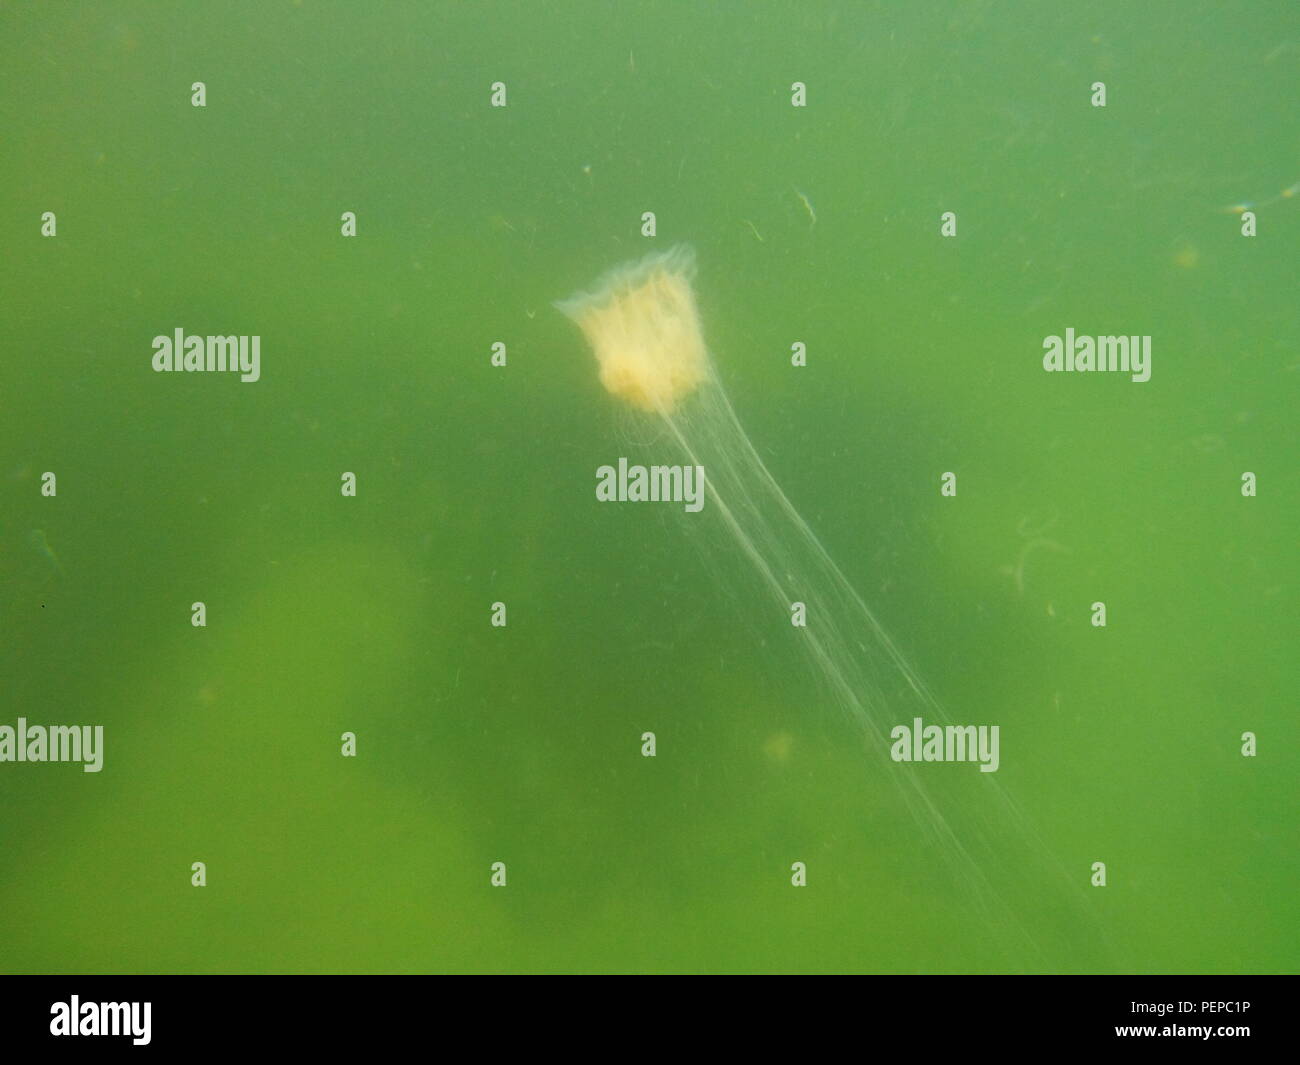 13 August 2018, Germany, Niendorf/Baltic Sea: A fire jellyfish swims in the Baltic Sea. A warning was delivered by the Ostholstein district for the beaches between Timmendorf beach and Haffkrug after hundreds of the complaints of bathers who came in contact with jellyfish in the past few days. Photo: Thomas Müller/dpa Stock Photo